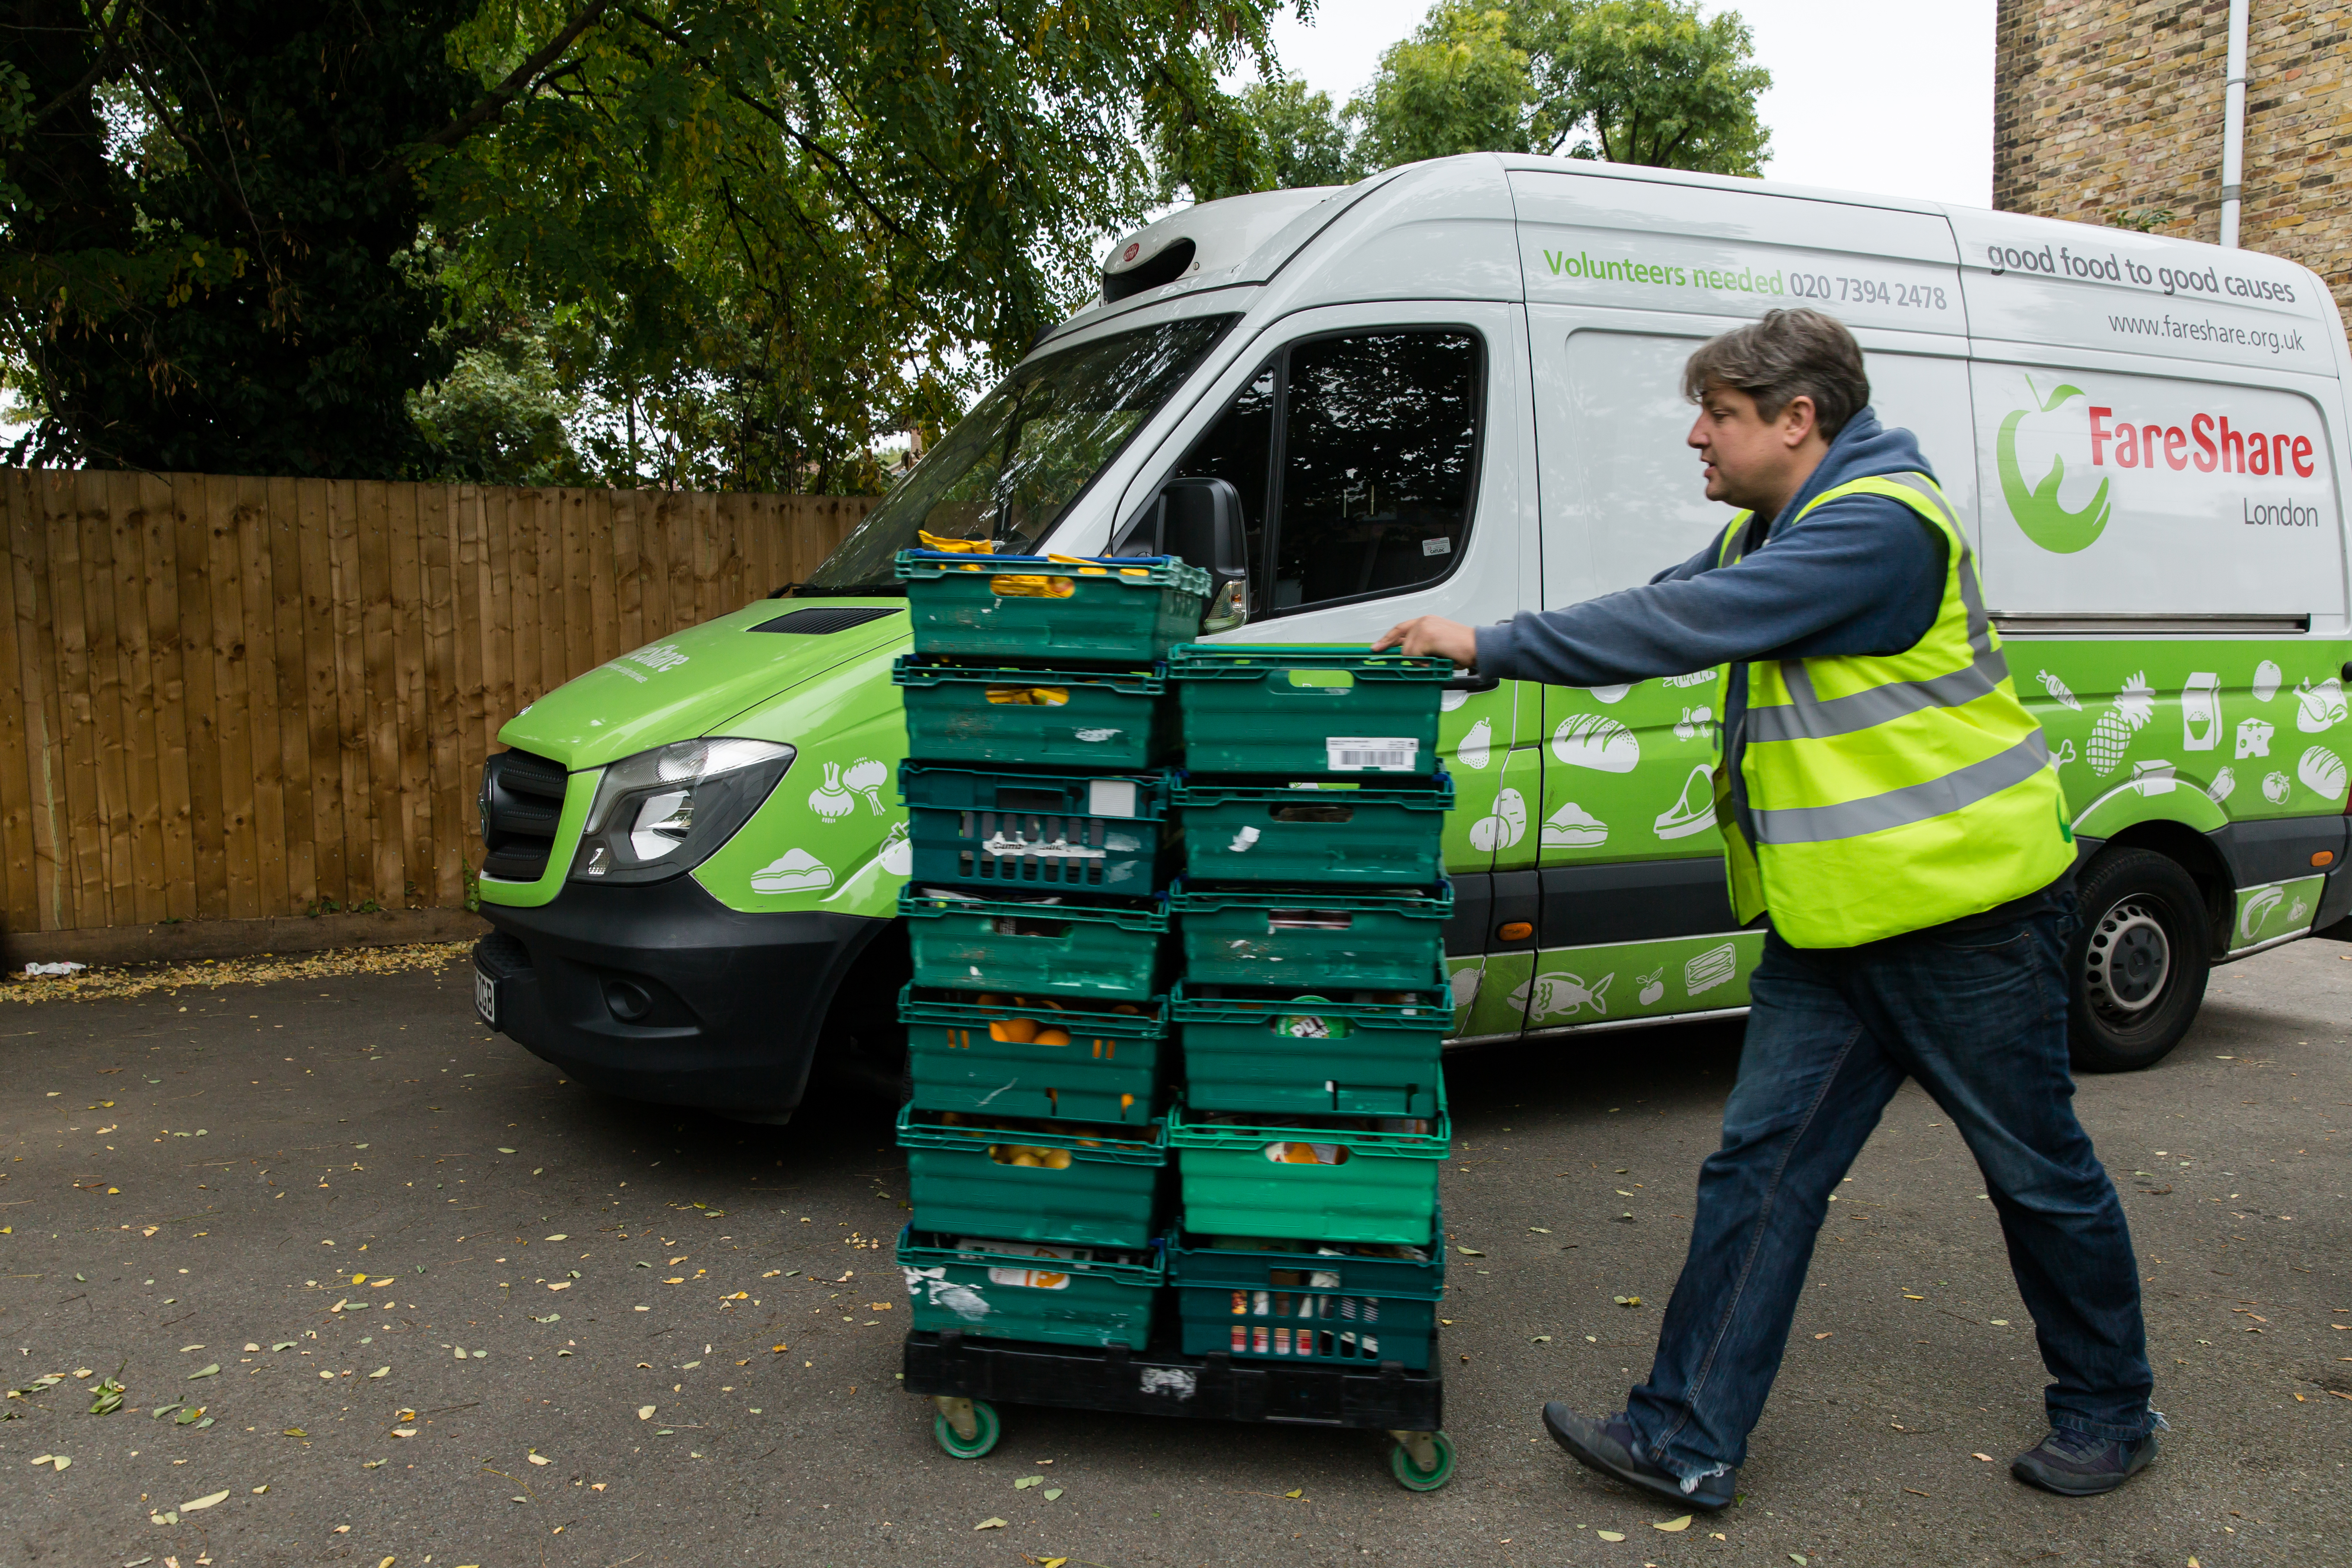 Asda has teamed up with FareShare and the Trussell Trust to tackle poverty